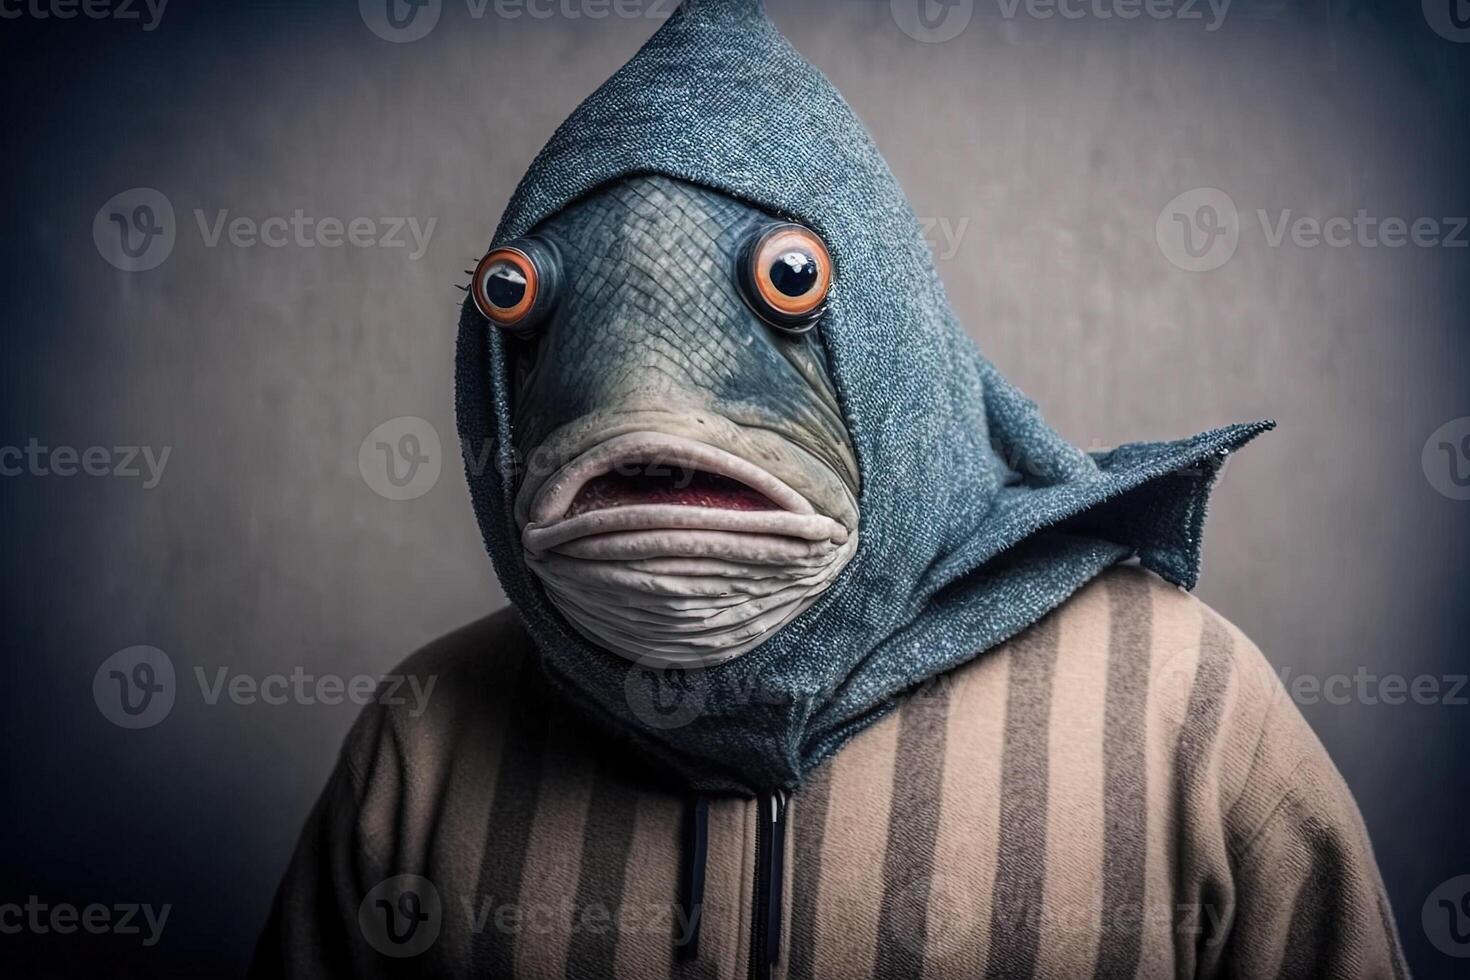 Man disguised with a fish costume for the april fool's day joke illustration photo